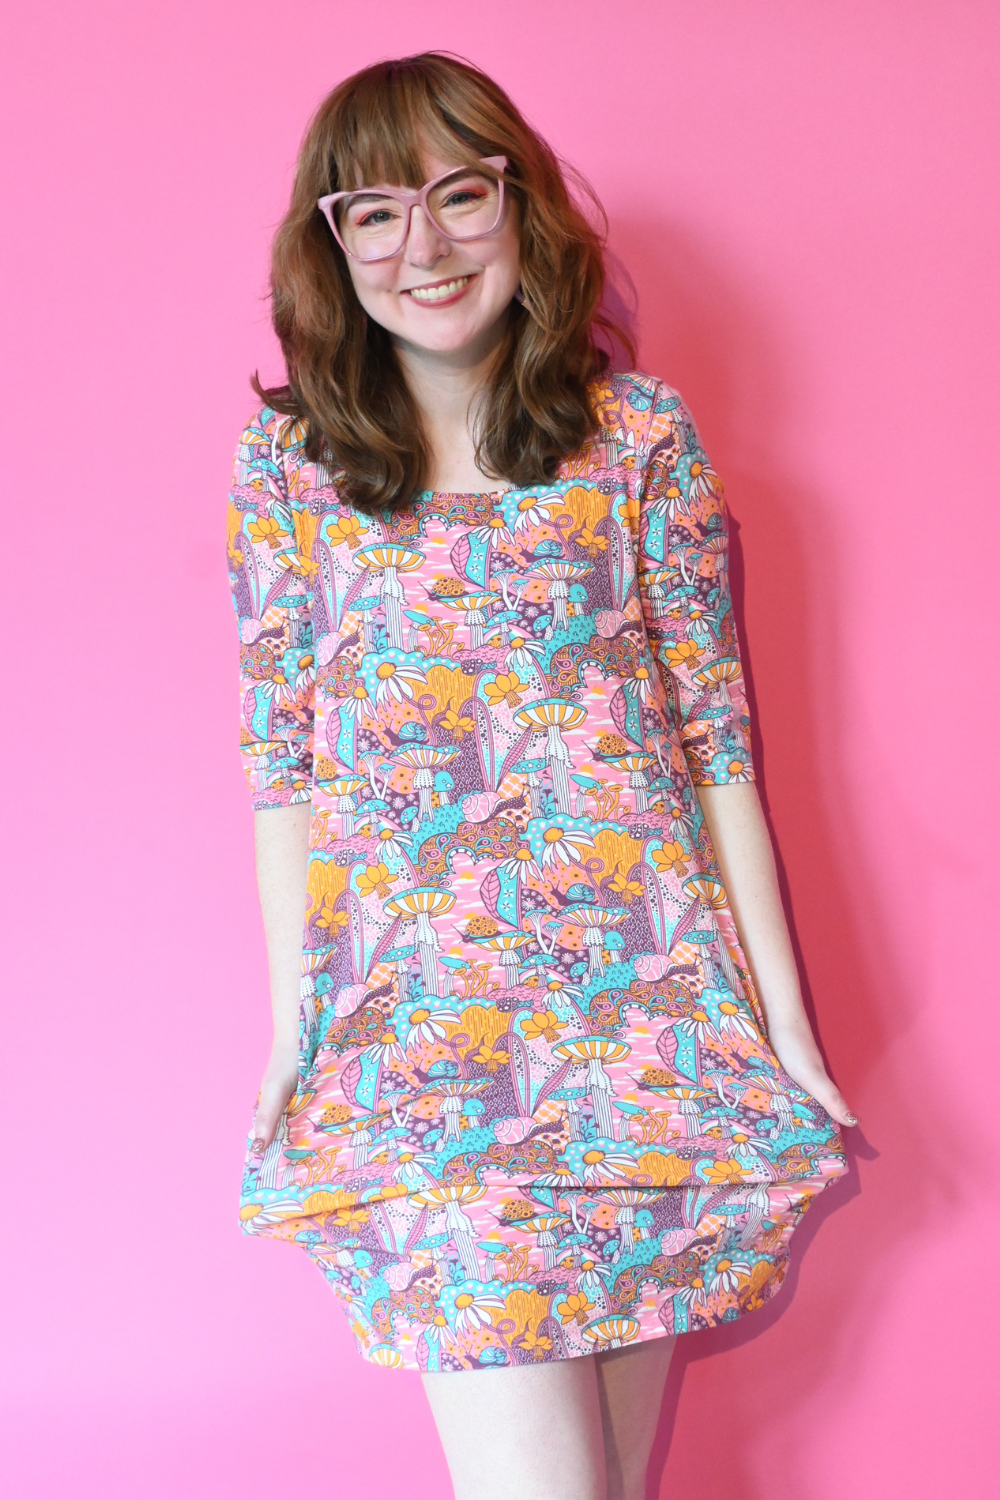 Model wearing pink, yellow and aqua pocket tunic with mushrooms, flowers and snails